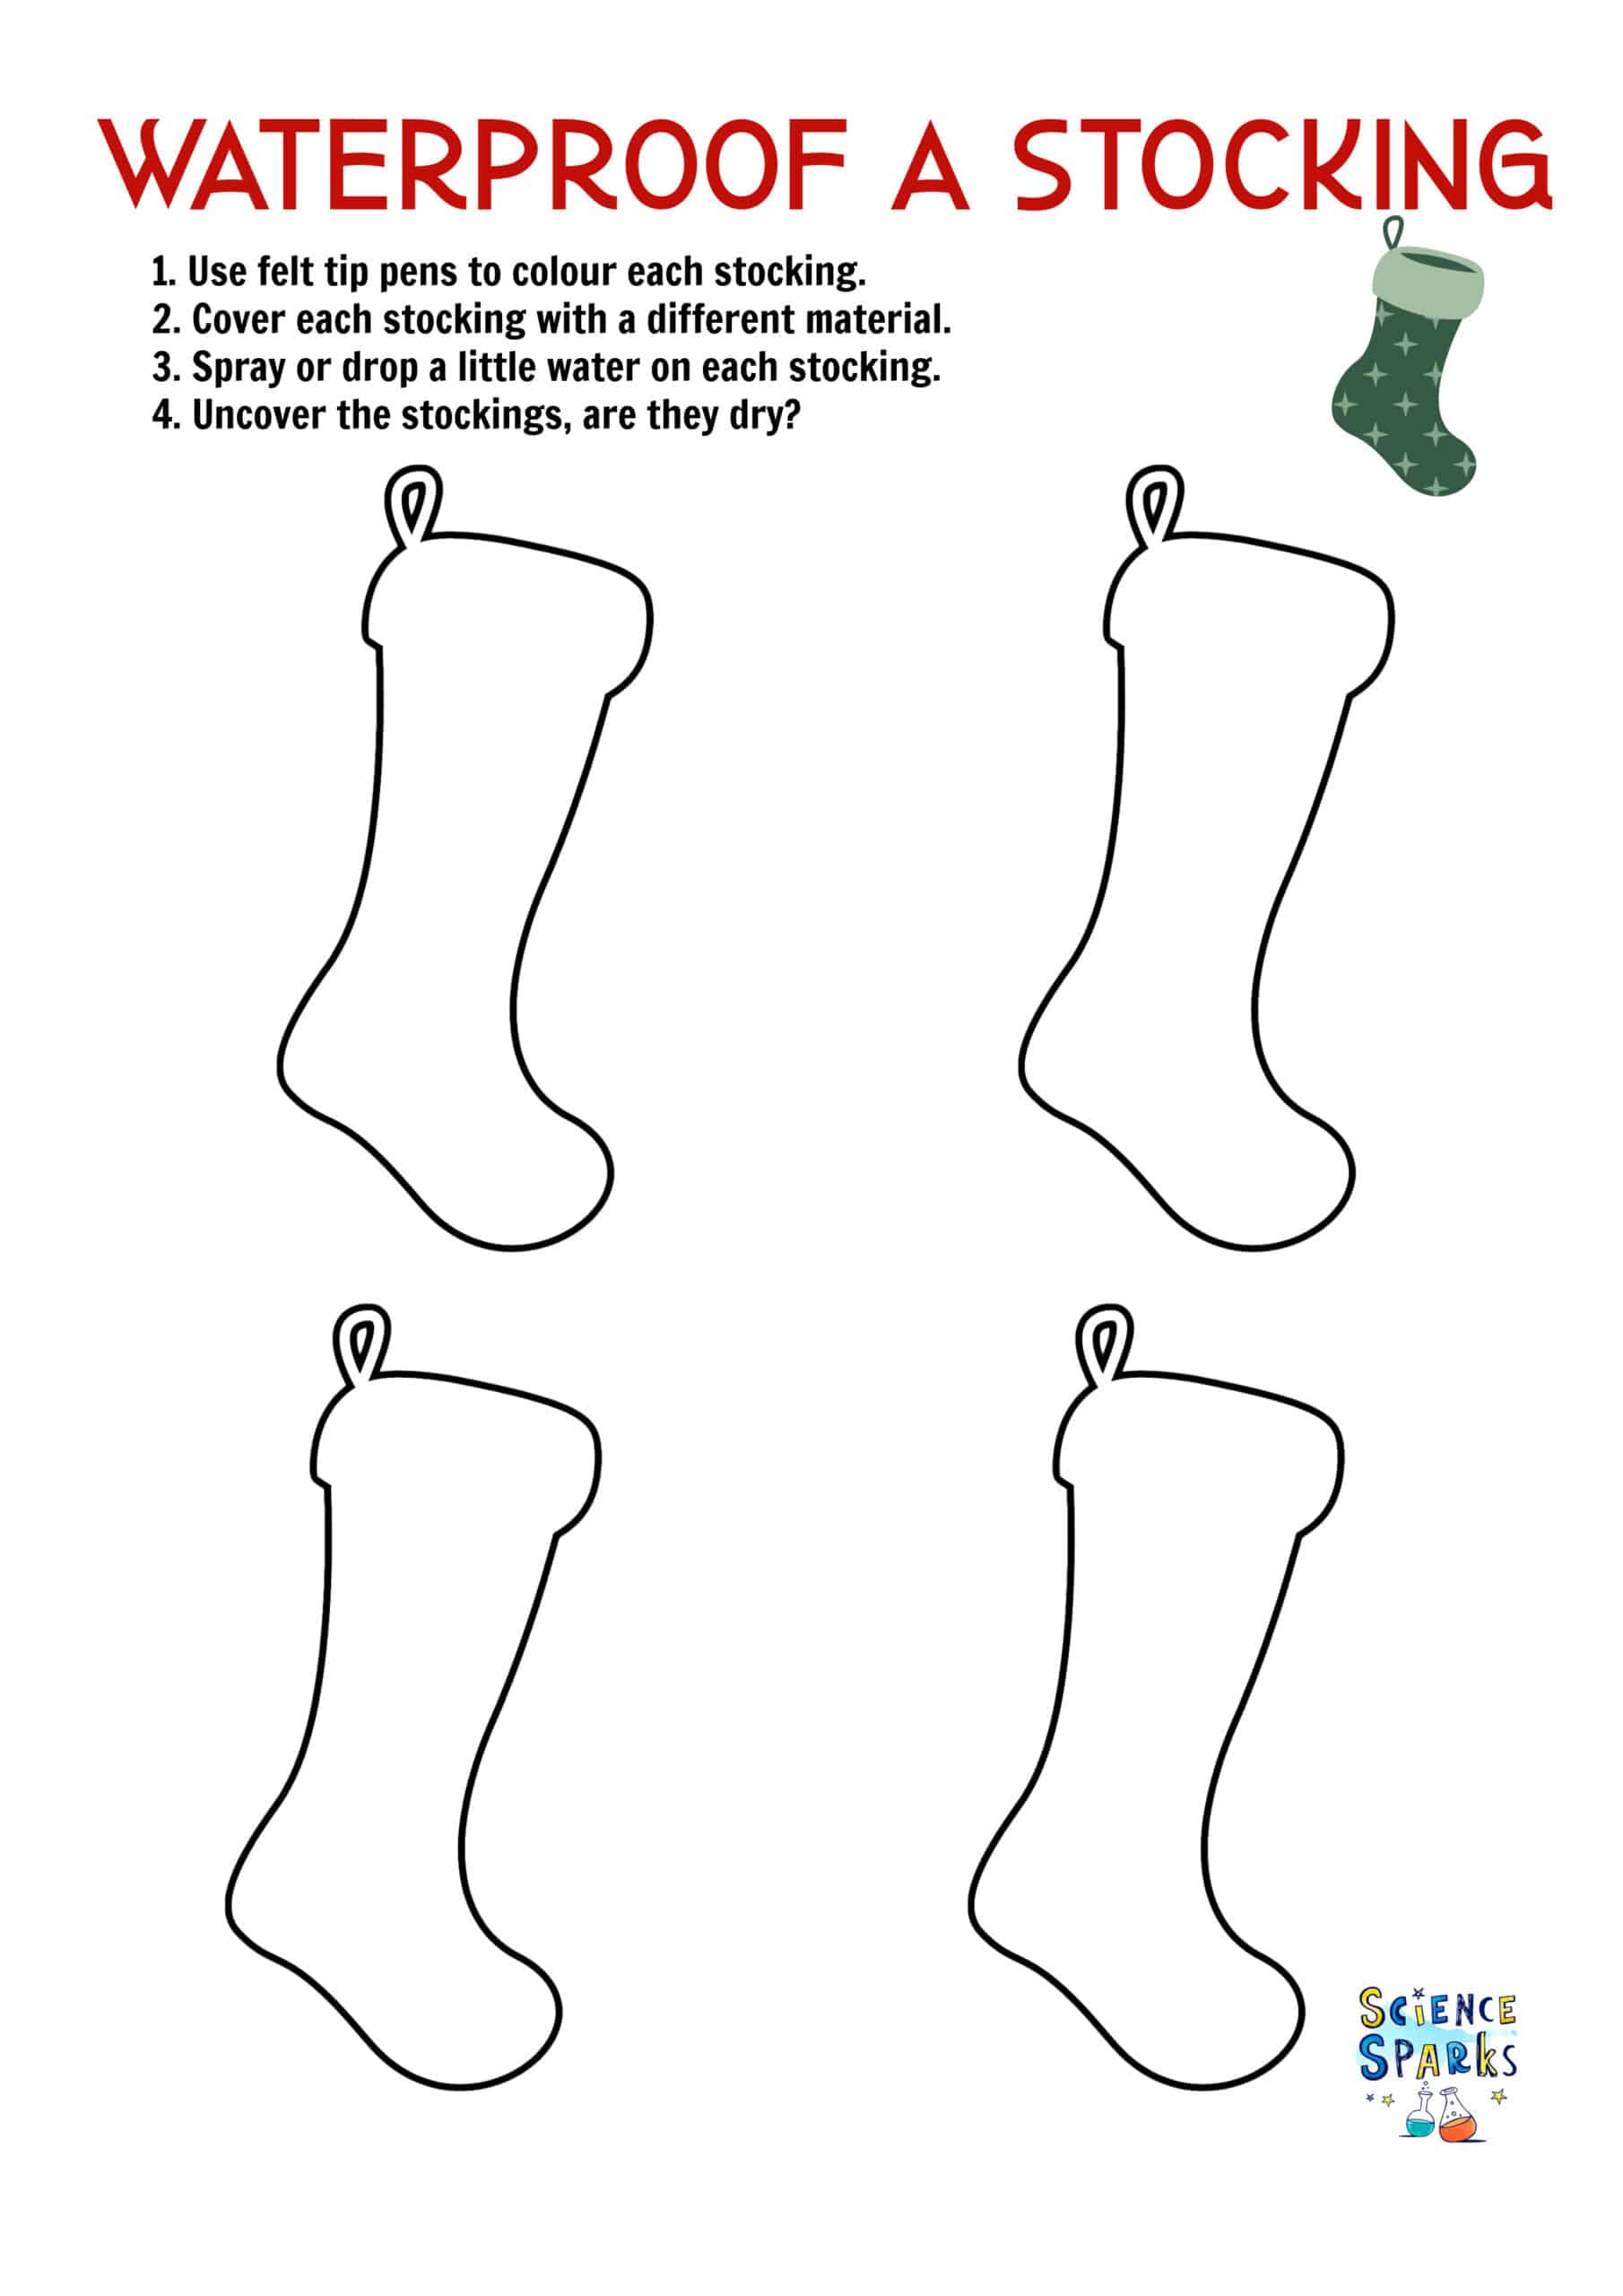 template for a waterproof a Christmas stocking STEM challenge